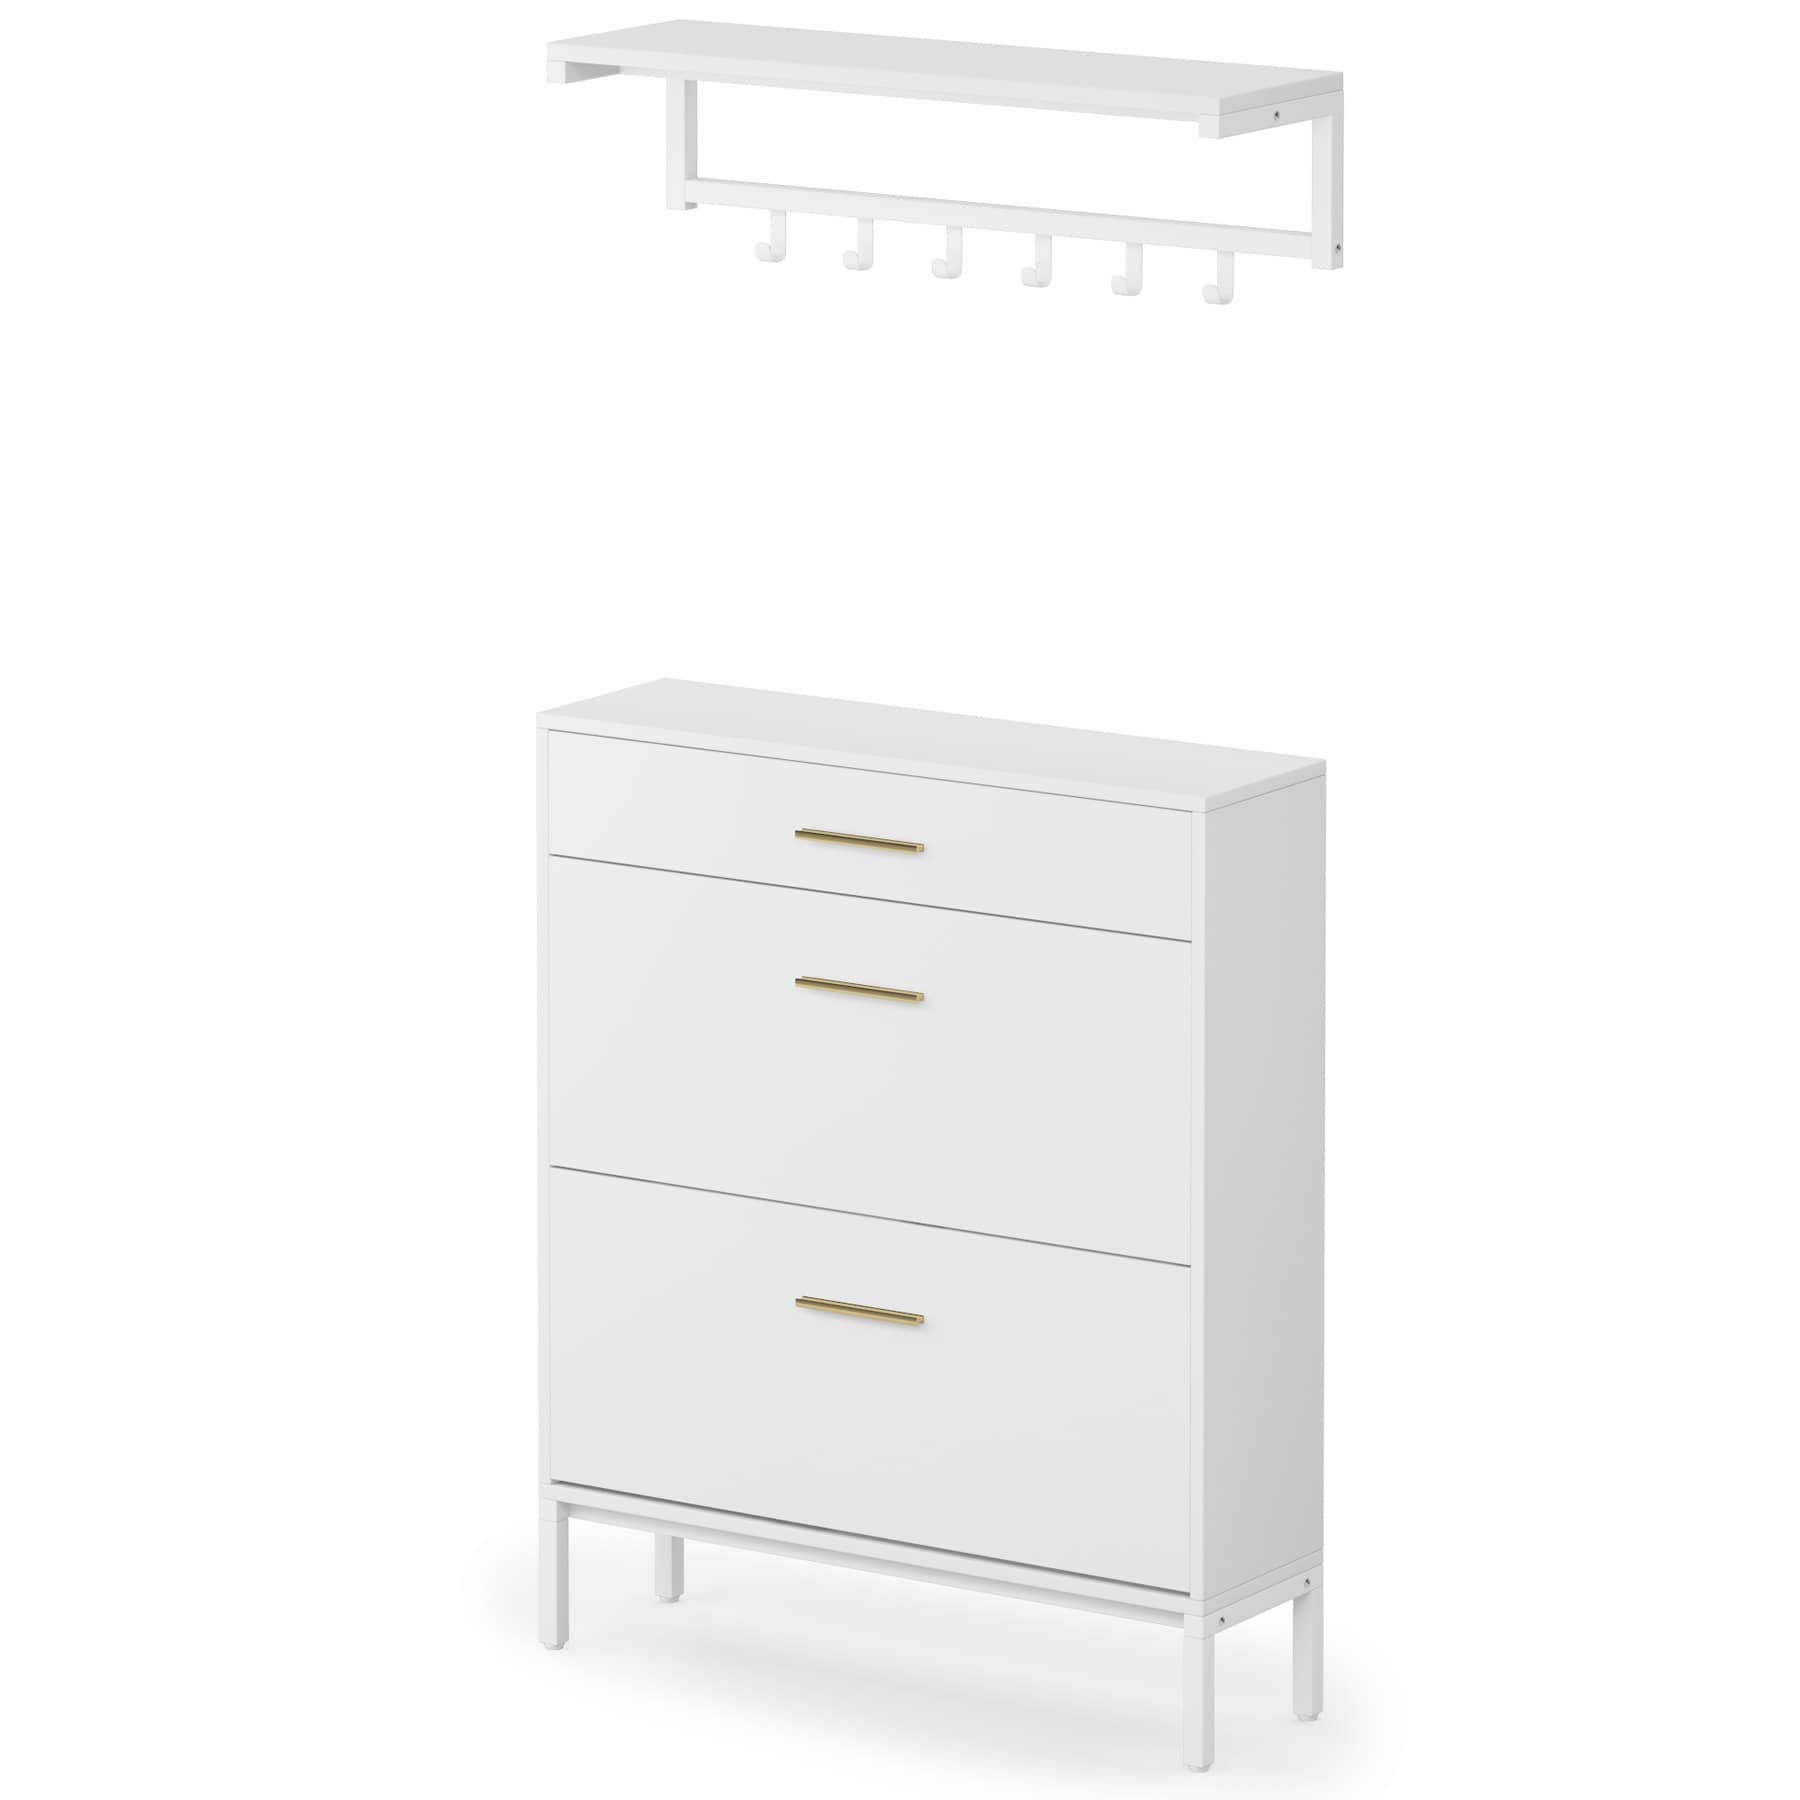 https://ak1.ostkcdn.com/images/products/is/images/direct/541d7e29a06b8a8bd6118d097c975612031f88c5/Modern-Flip-Drawer-Shoe-Cabinet-%26-Wall-Mounted-Coat-Rack-Set%2C-16-Pair-White-3-Drawers-Narrow-Shoe-Rack-Storage-Organizer.jpg